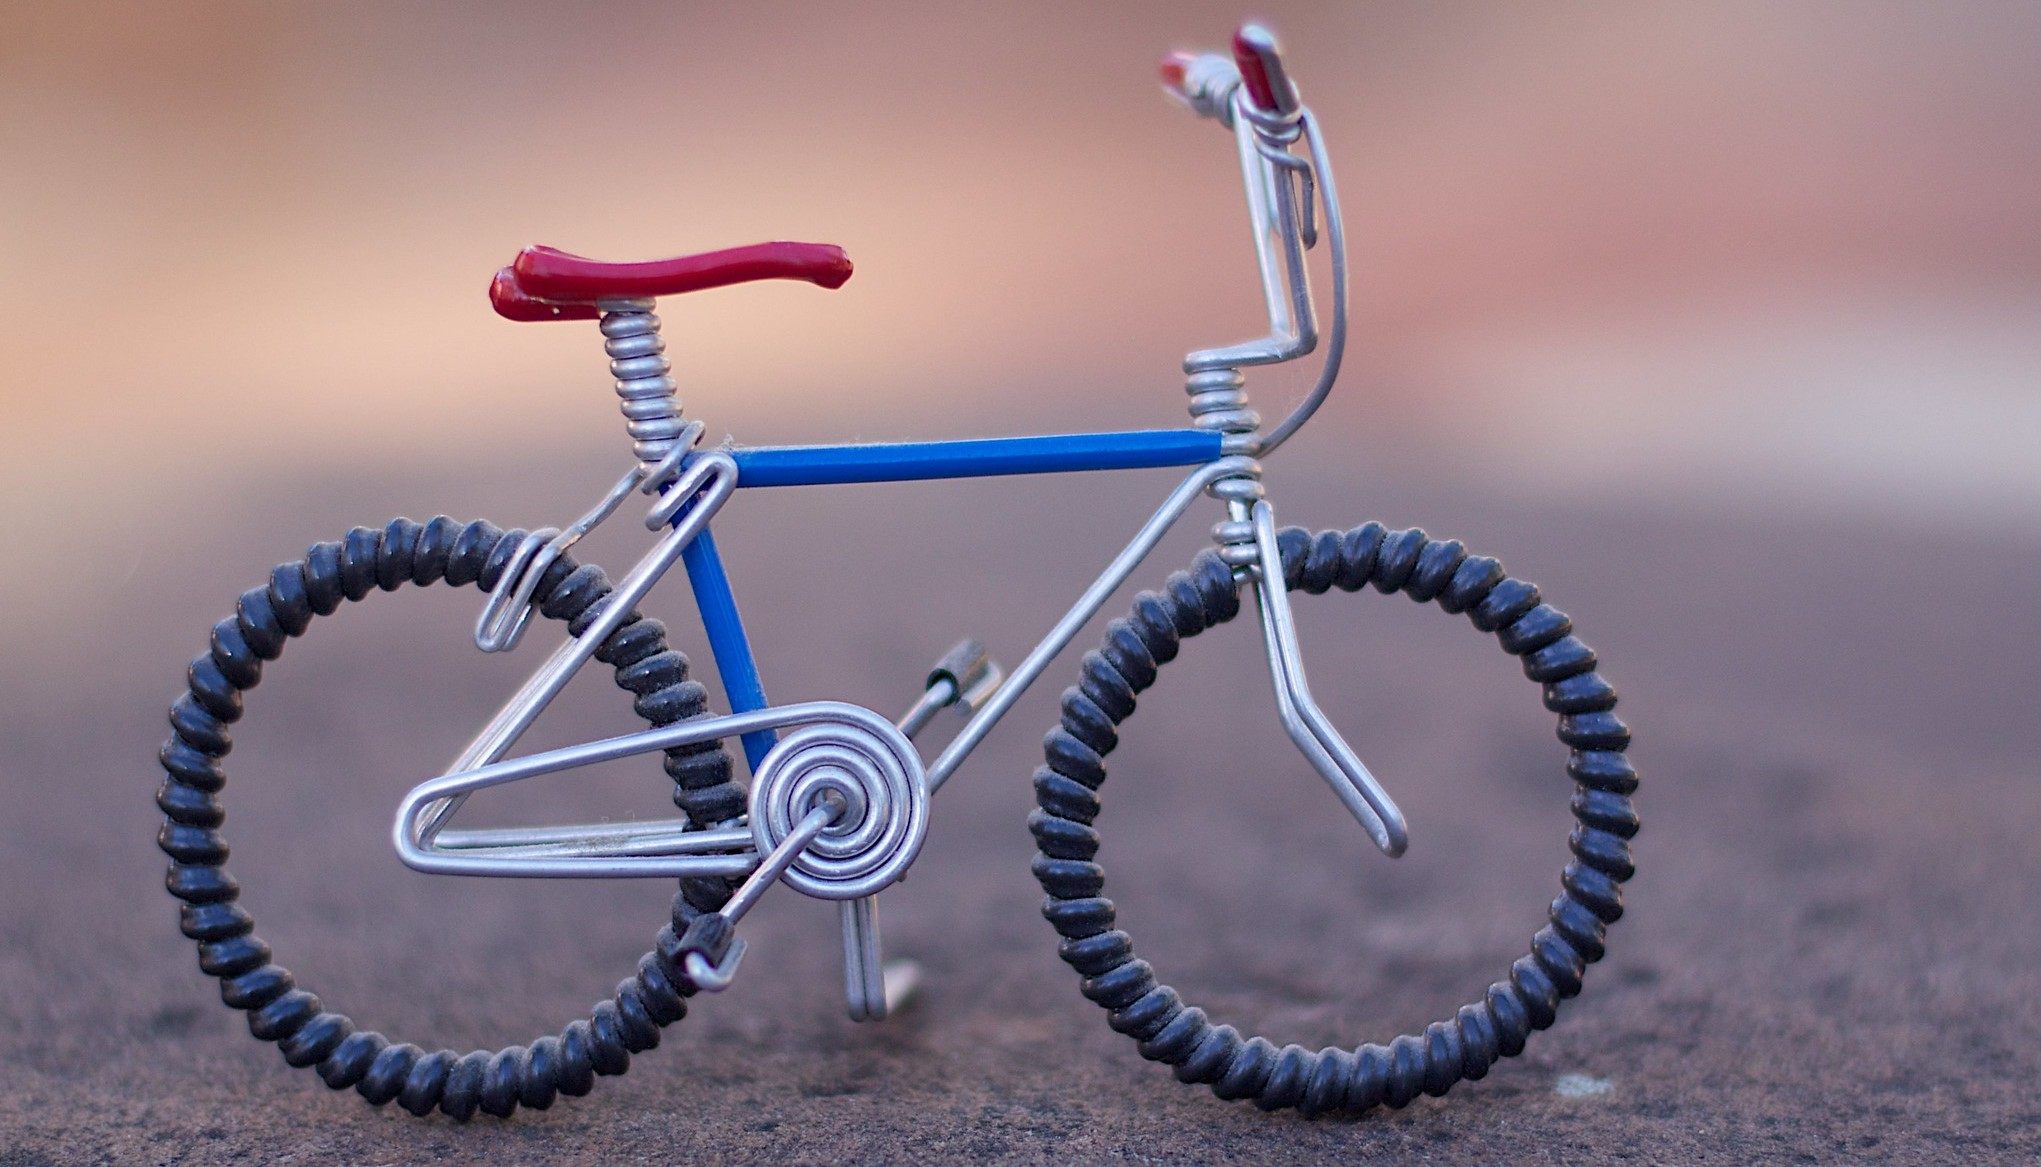 Someone built this little toy bike here, which is pretty cool